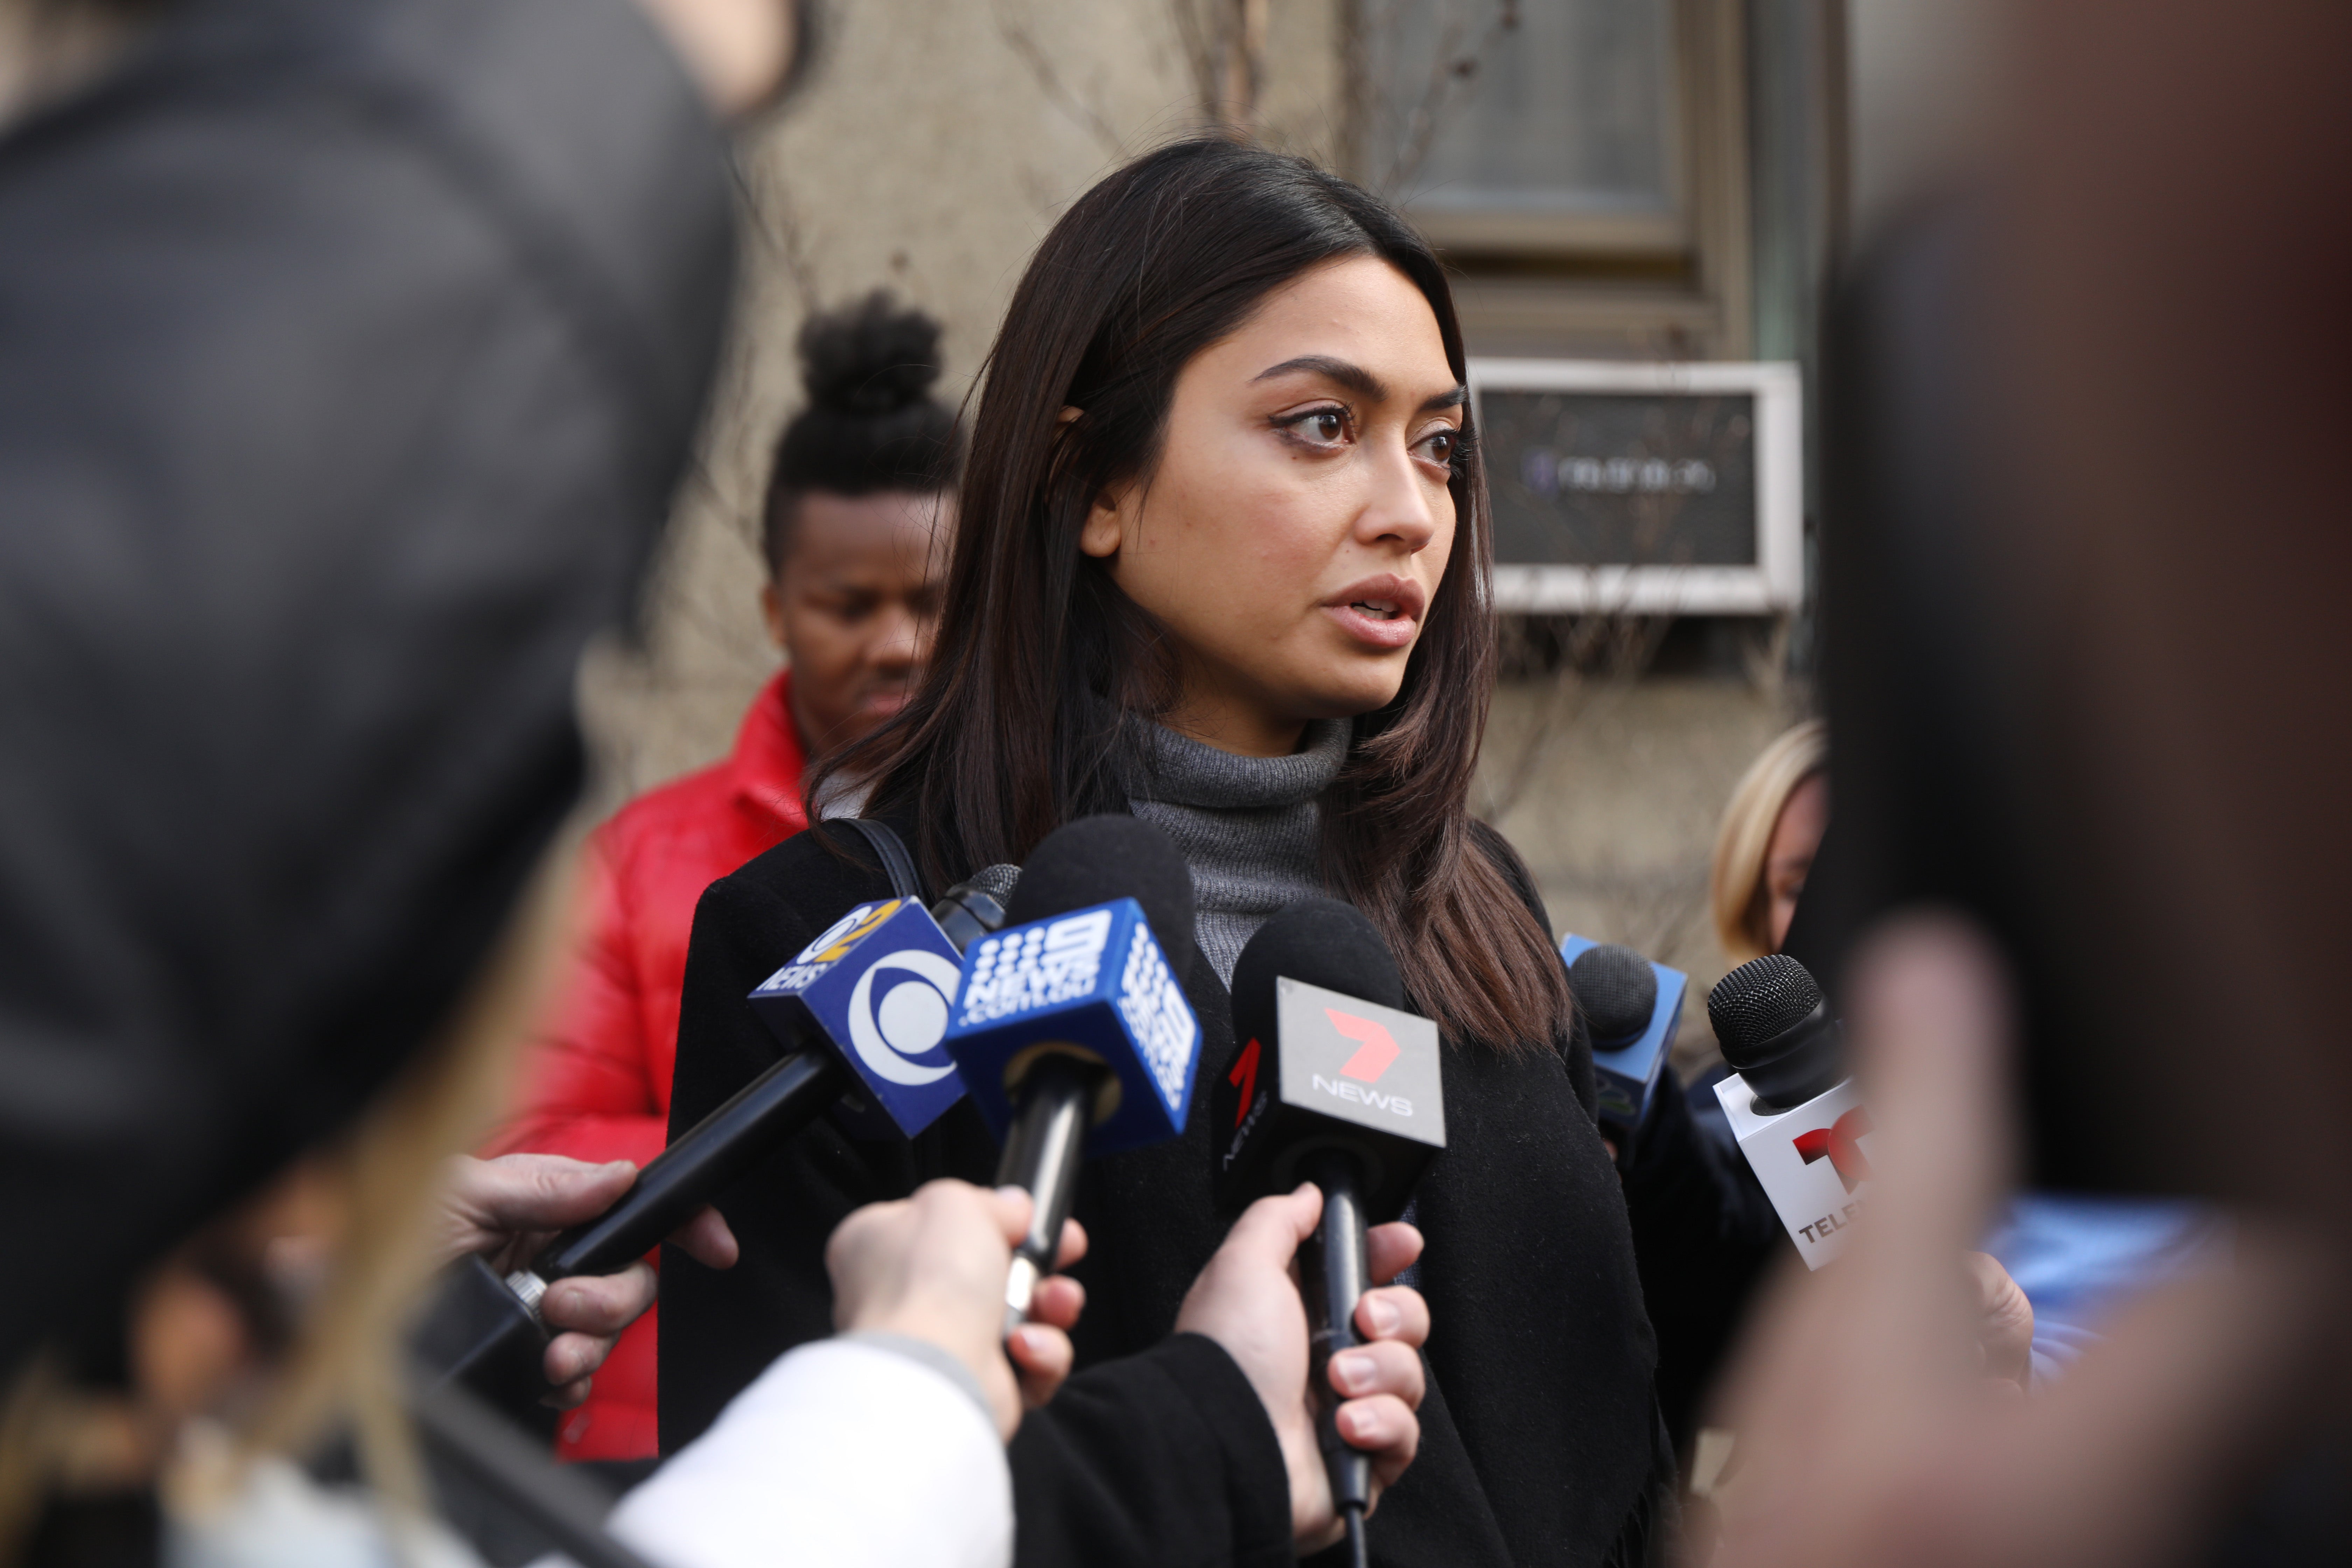 Model Ambra Battilana Gutierrez, pictured speaking after Harvey Weinstein’s 2020 trial, called the decision part of an ‘ongoing failure’